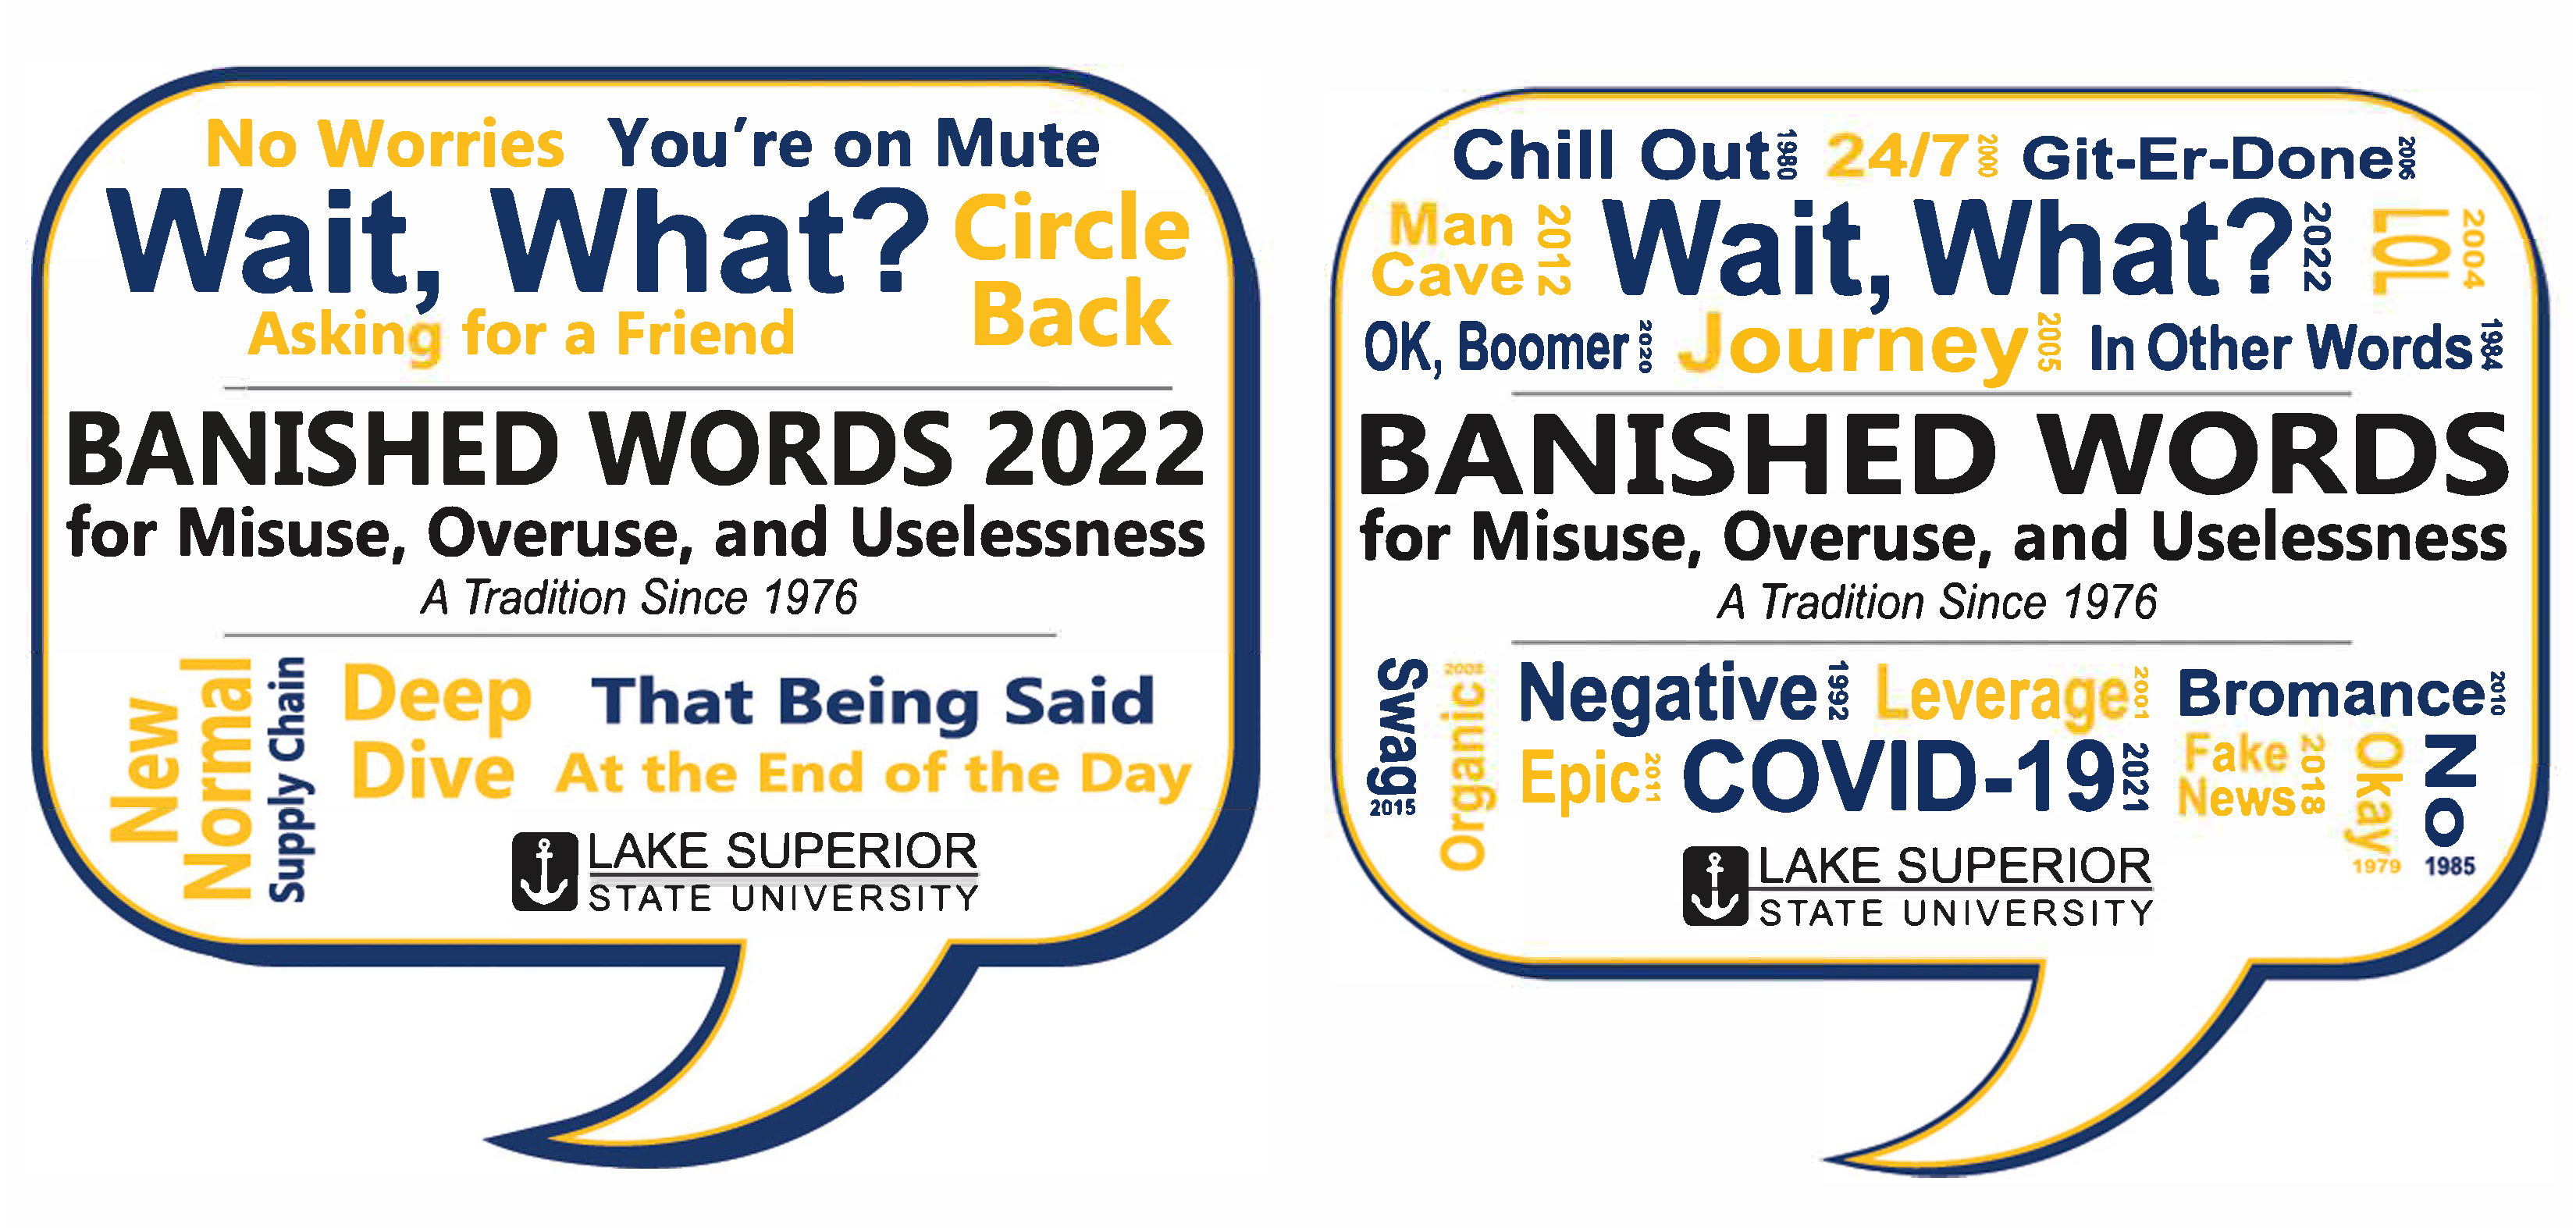 Banished Words Listed By Year 1976 - 2022 Tradition